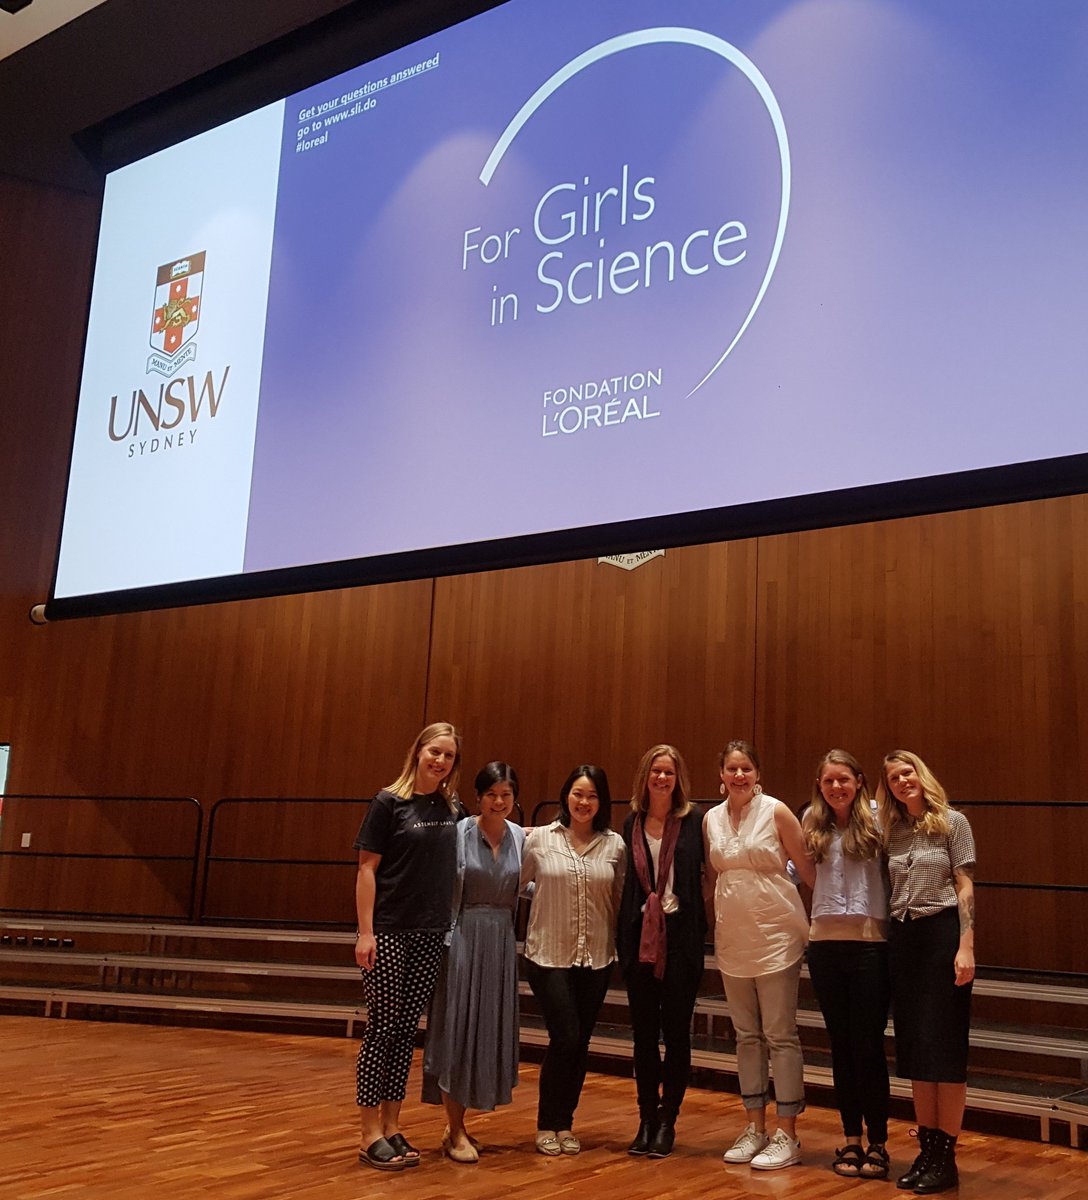 Day 2 at @LOrealAustralia #girlsinscience with these legends! Thanks @UNSWScience for hosting us today! #fwis2019 @4womeninscience @WomenSciAUST #WomenInSTEM